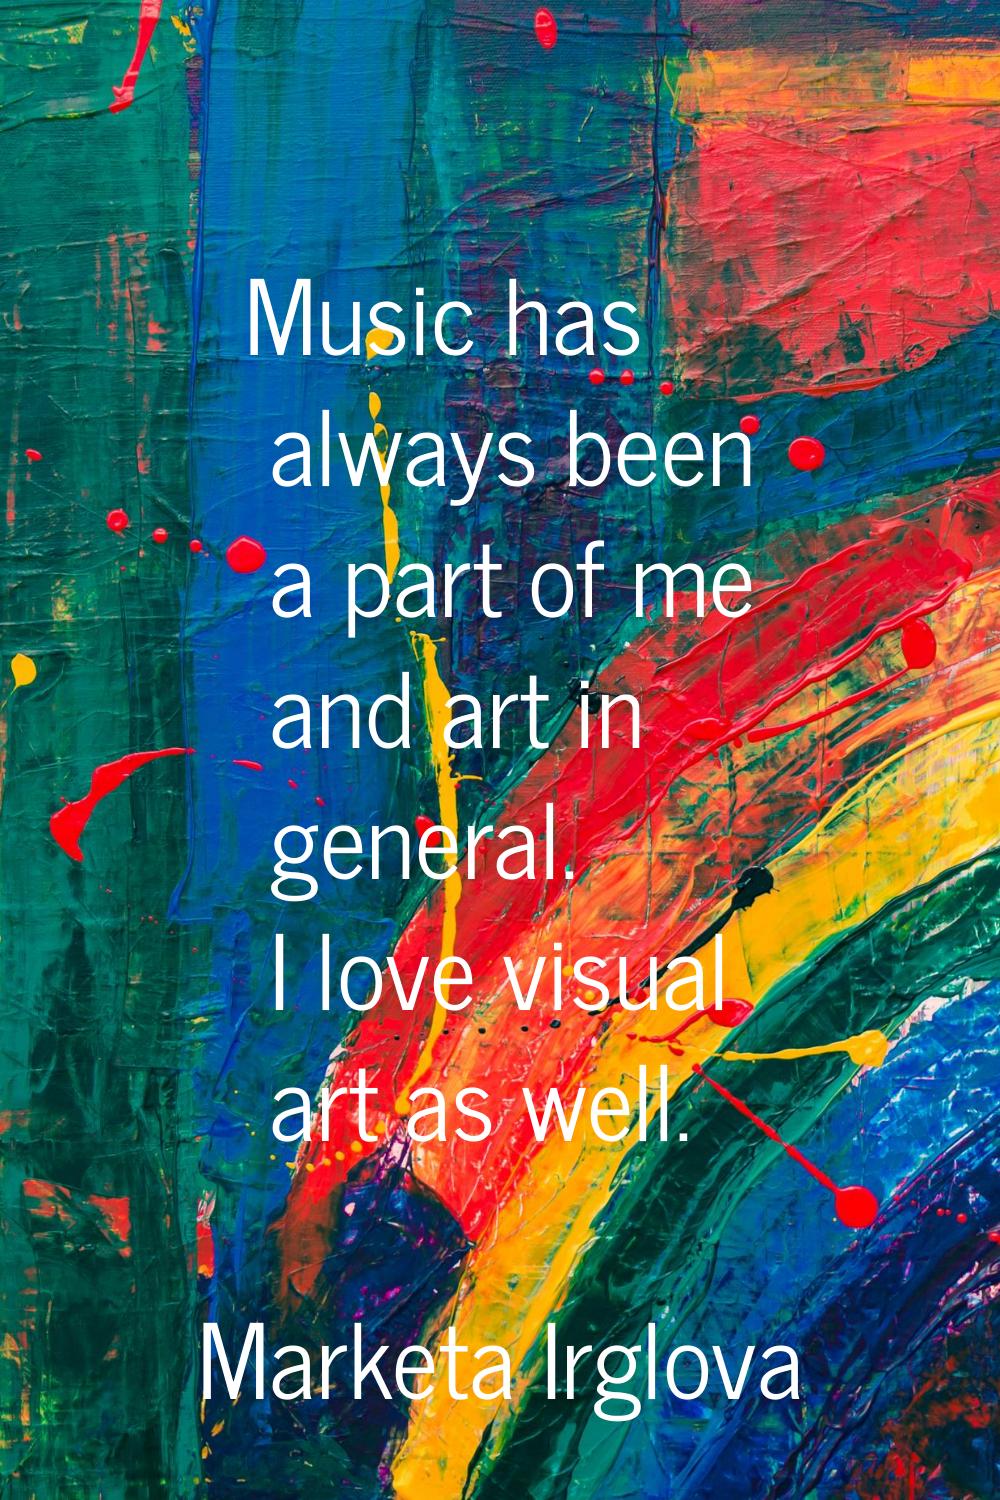 Music has always been a part of me and art in general. I love visual art as well.